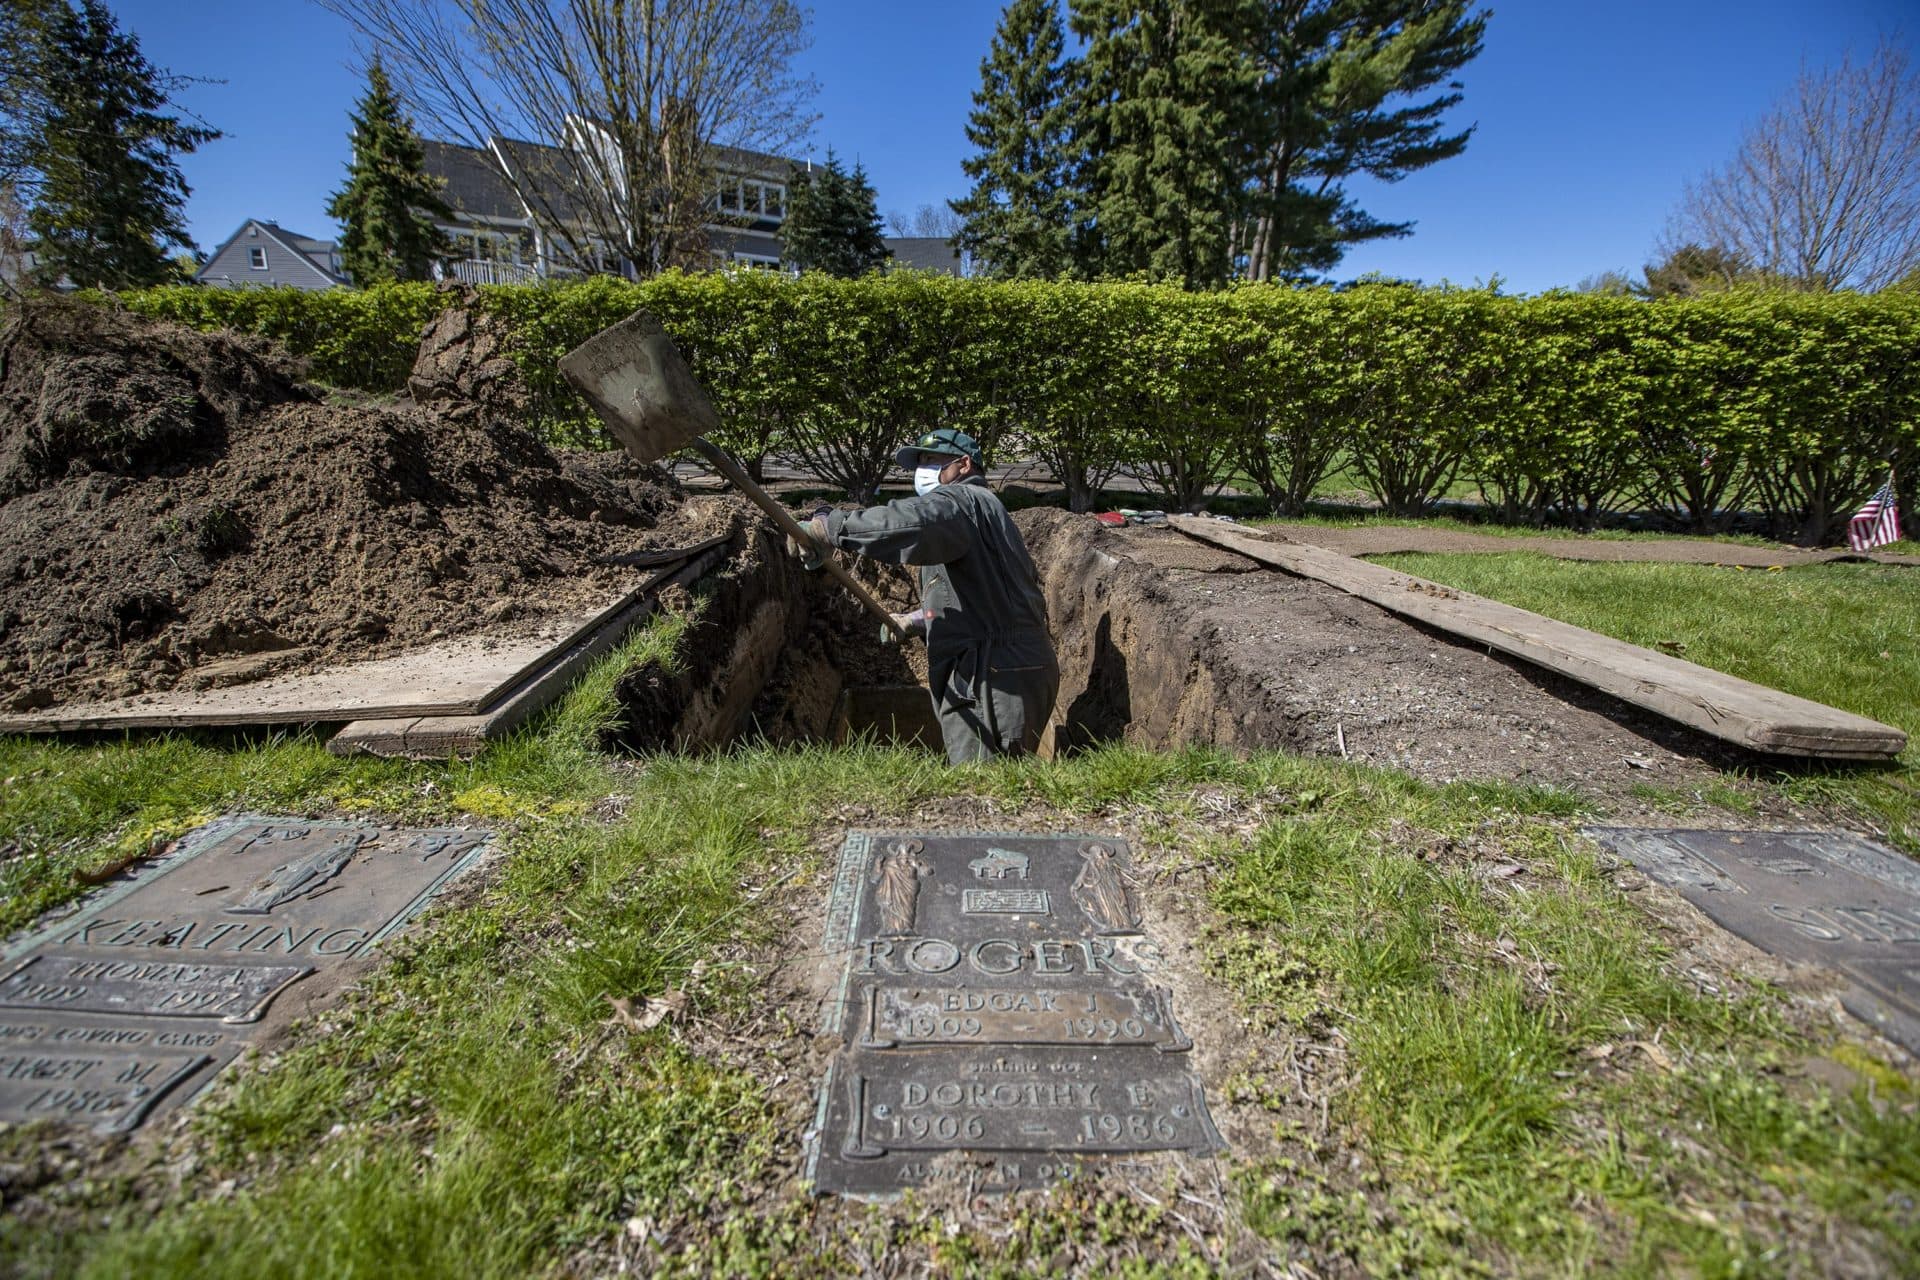 Roberto Arias digs out a grave site at Woodlawn Cemetery in Everett, one of 10 sites being prepared that day. (Jesse Costa/WBUR)